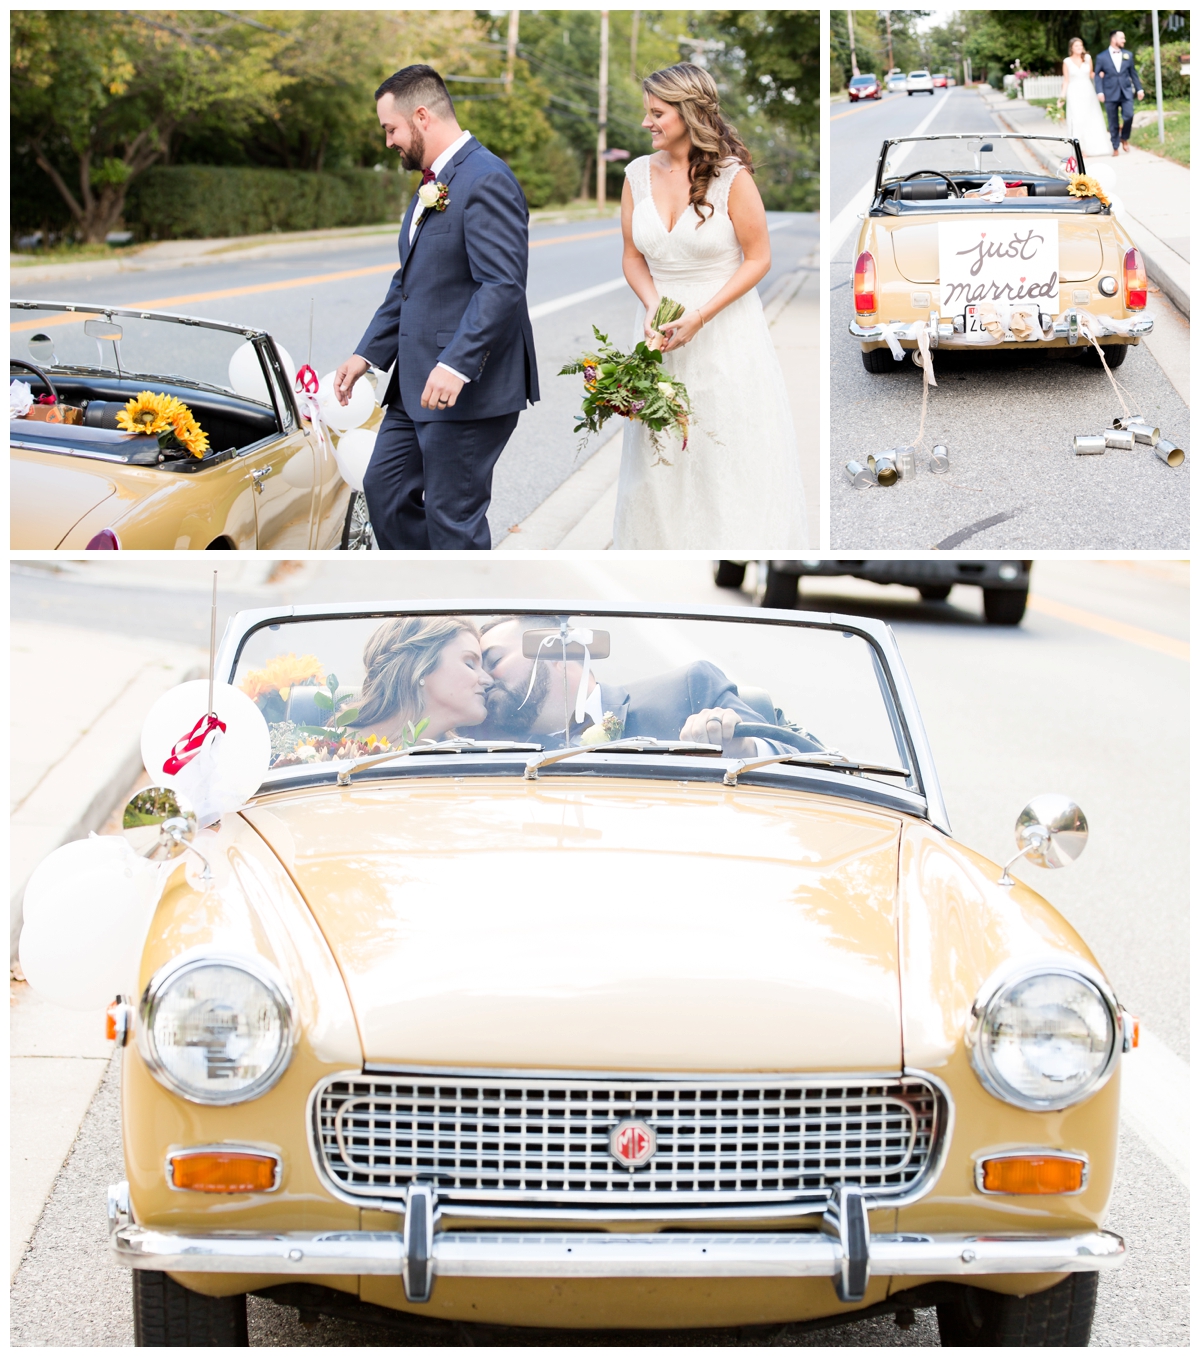 Newlyweds leaving their wedding ceremony in a historic MG Midget